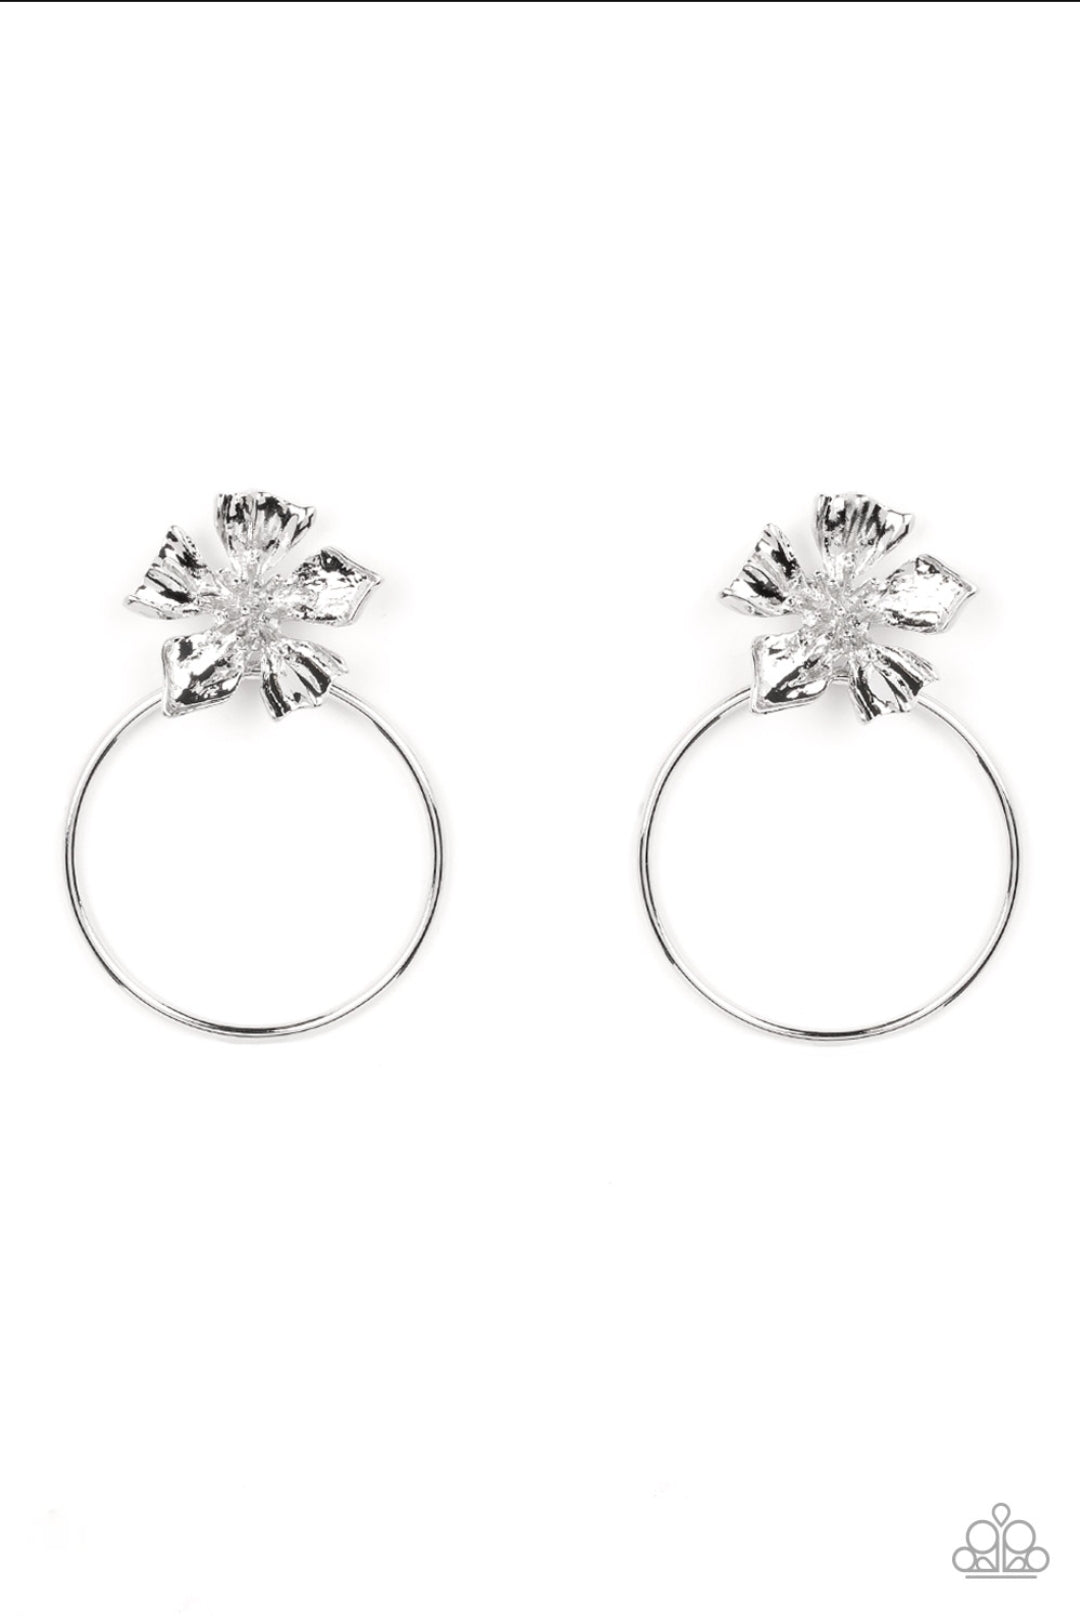 Buttercup Bliss Silver Earrings August 2022 Life of the Party Exclusive - Princess Glam Shop